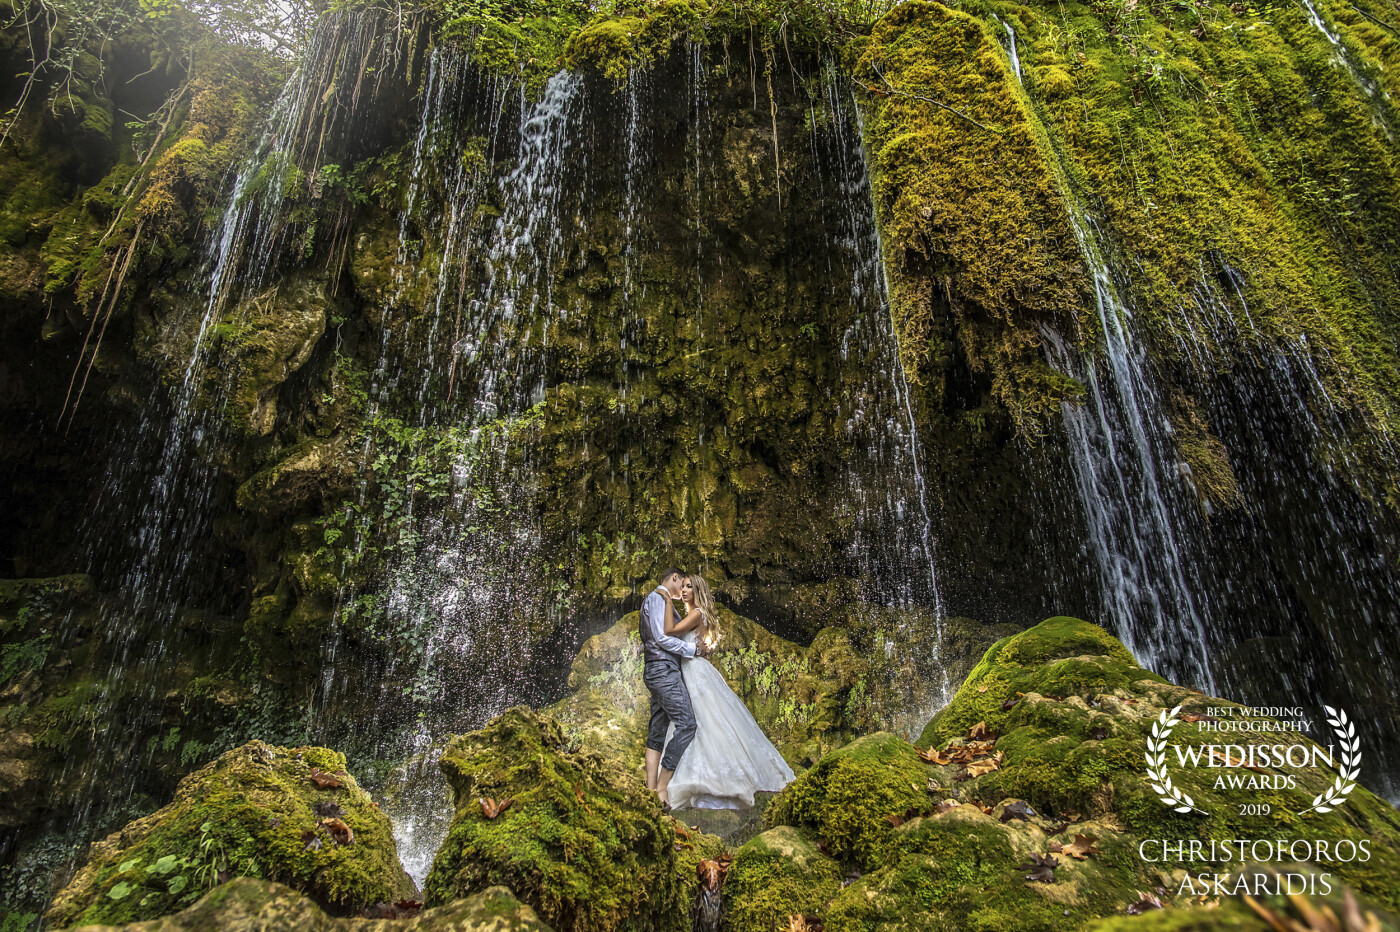 Vasilis & Eirilena, a beautiful couple. One of my favorite photos in Skra lake, Greece. After a long walk along the calm river you reach this breathtaking place. The result worth the effort! 